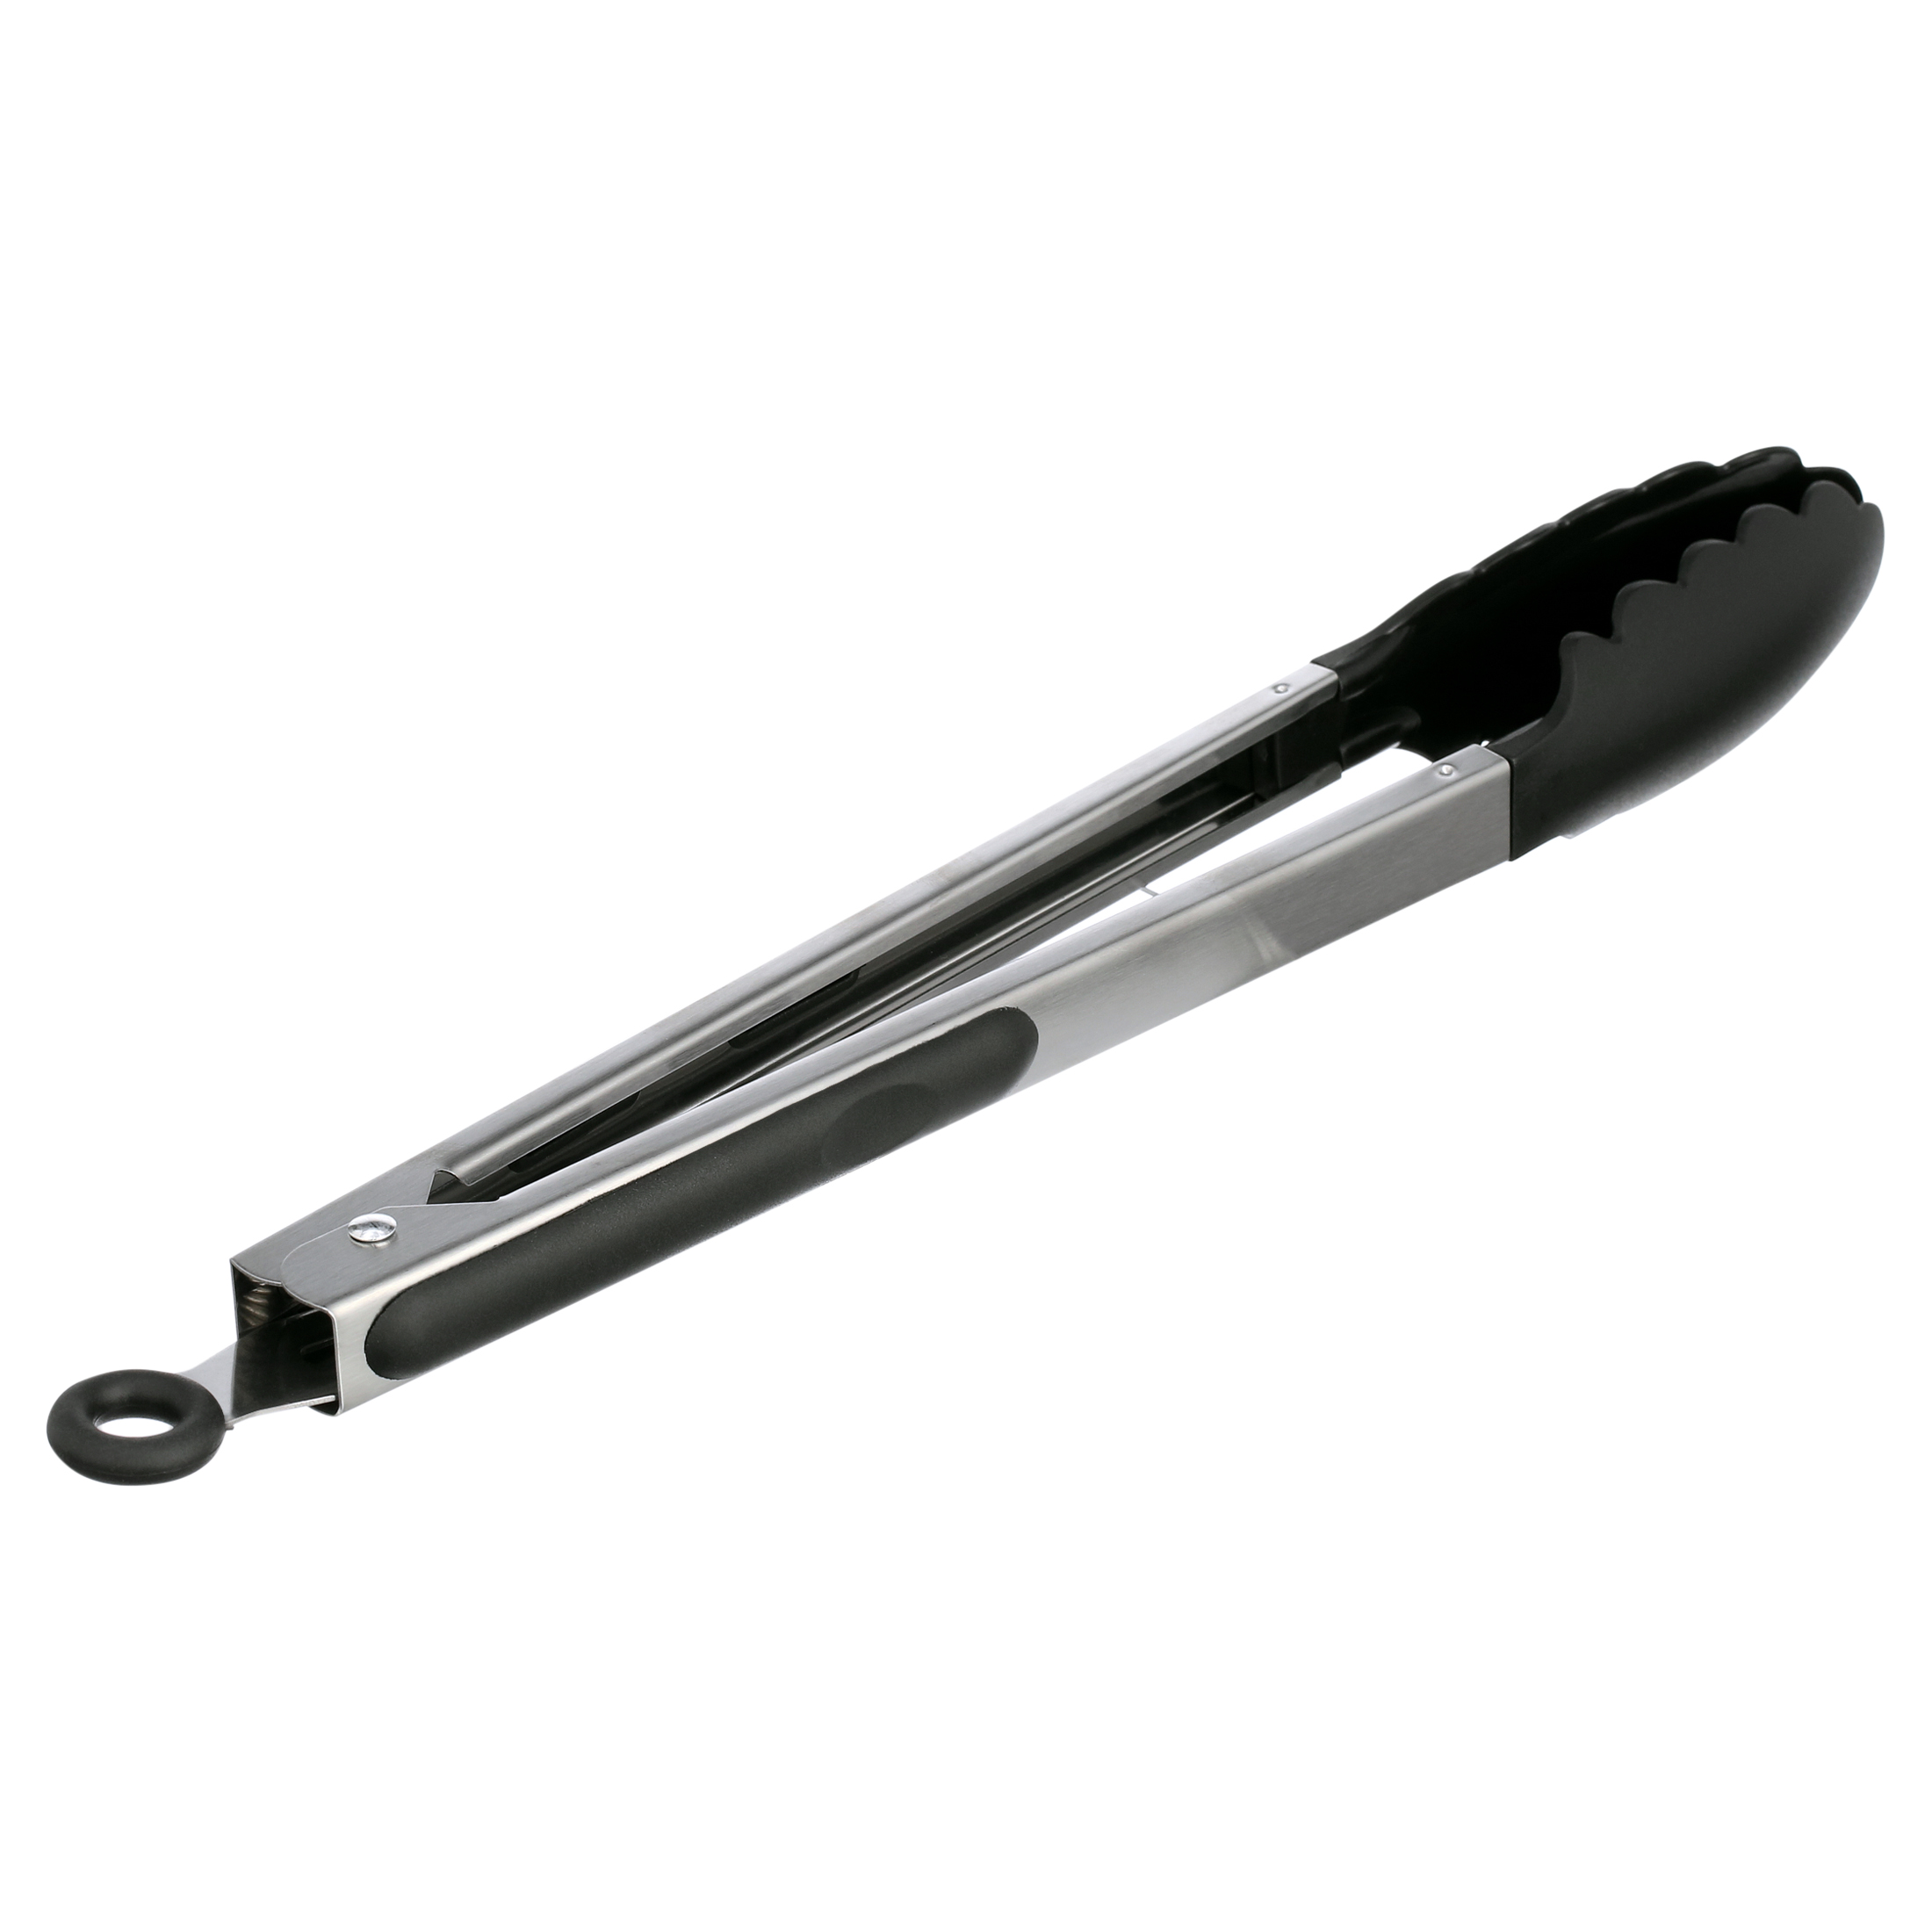 Mainstays Stainless Steel and Black Dripless Tongs - image 4 of 7